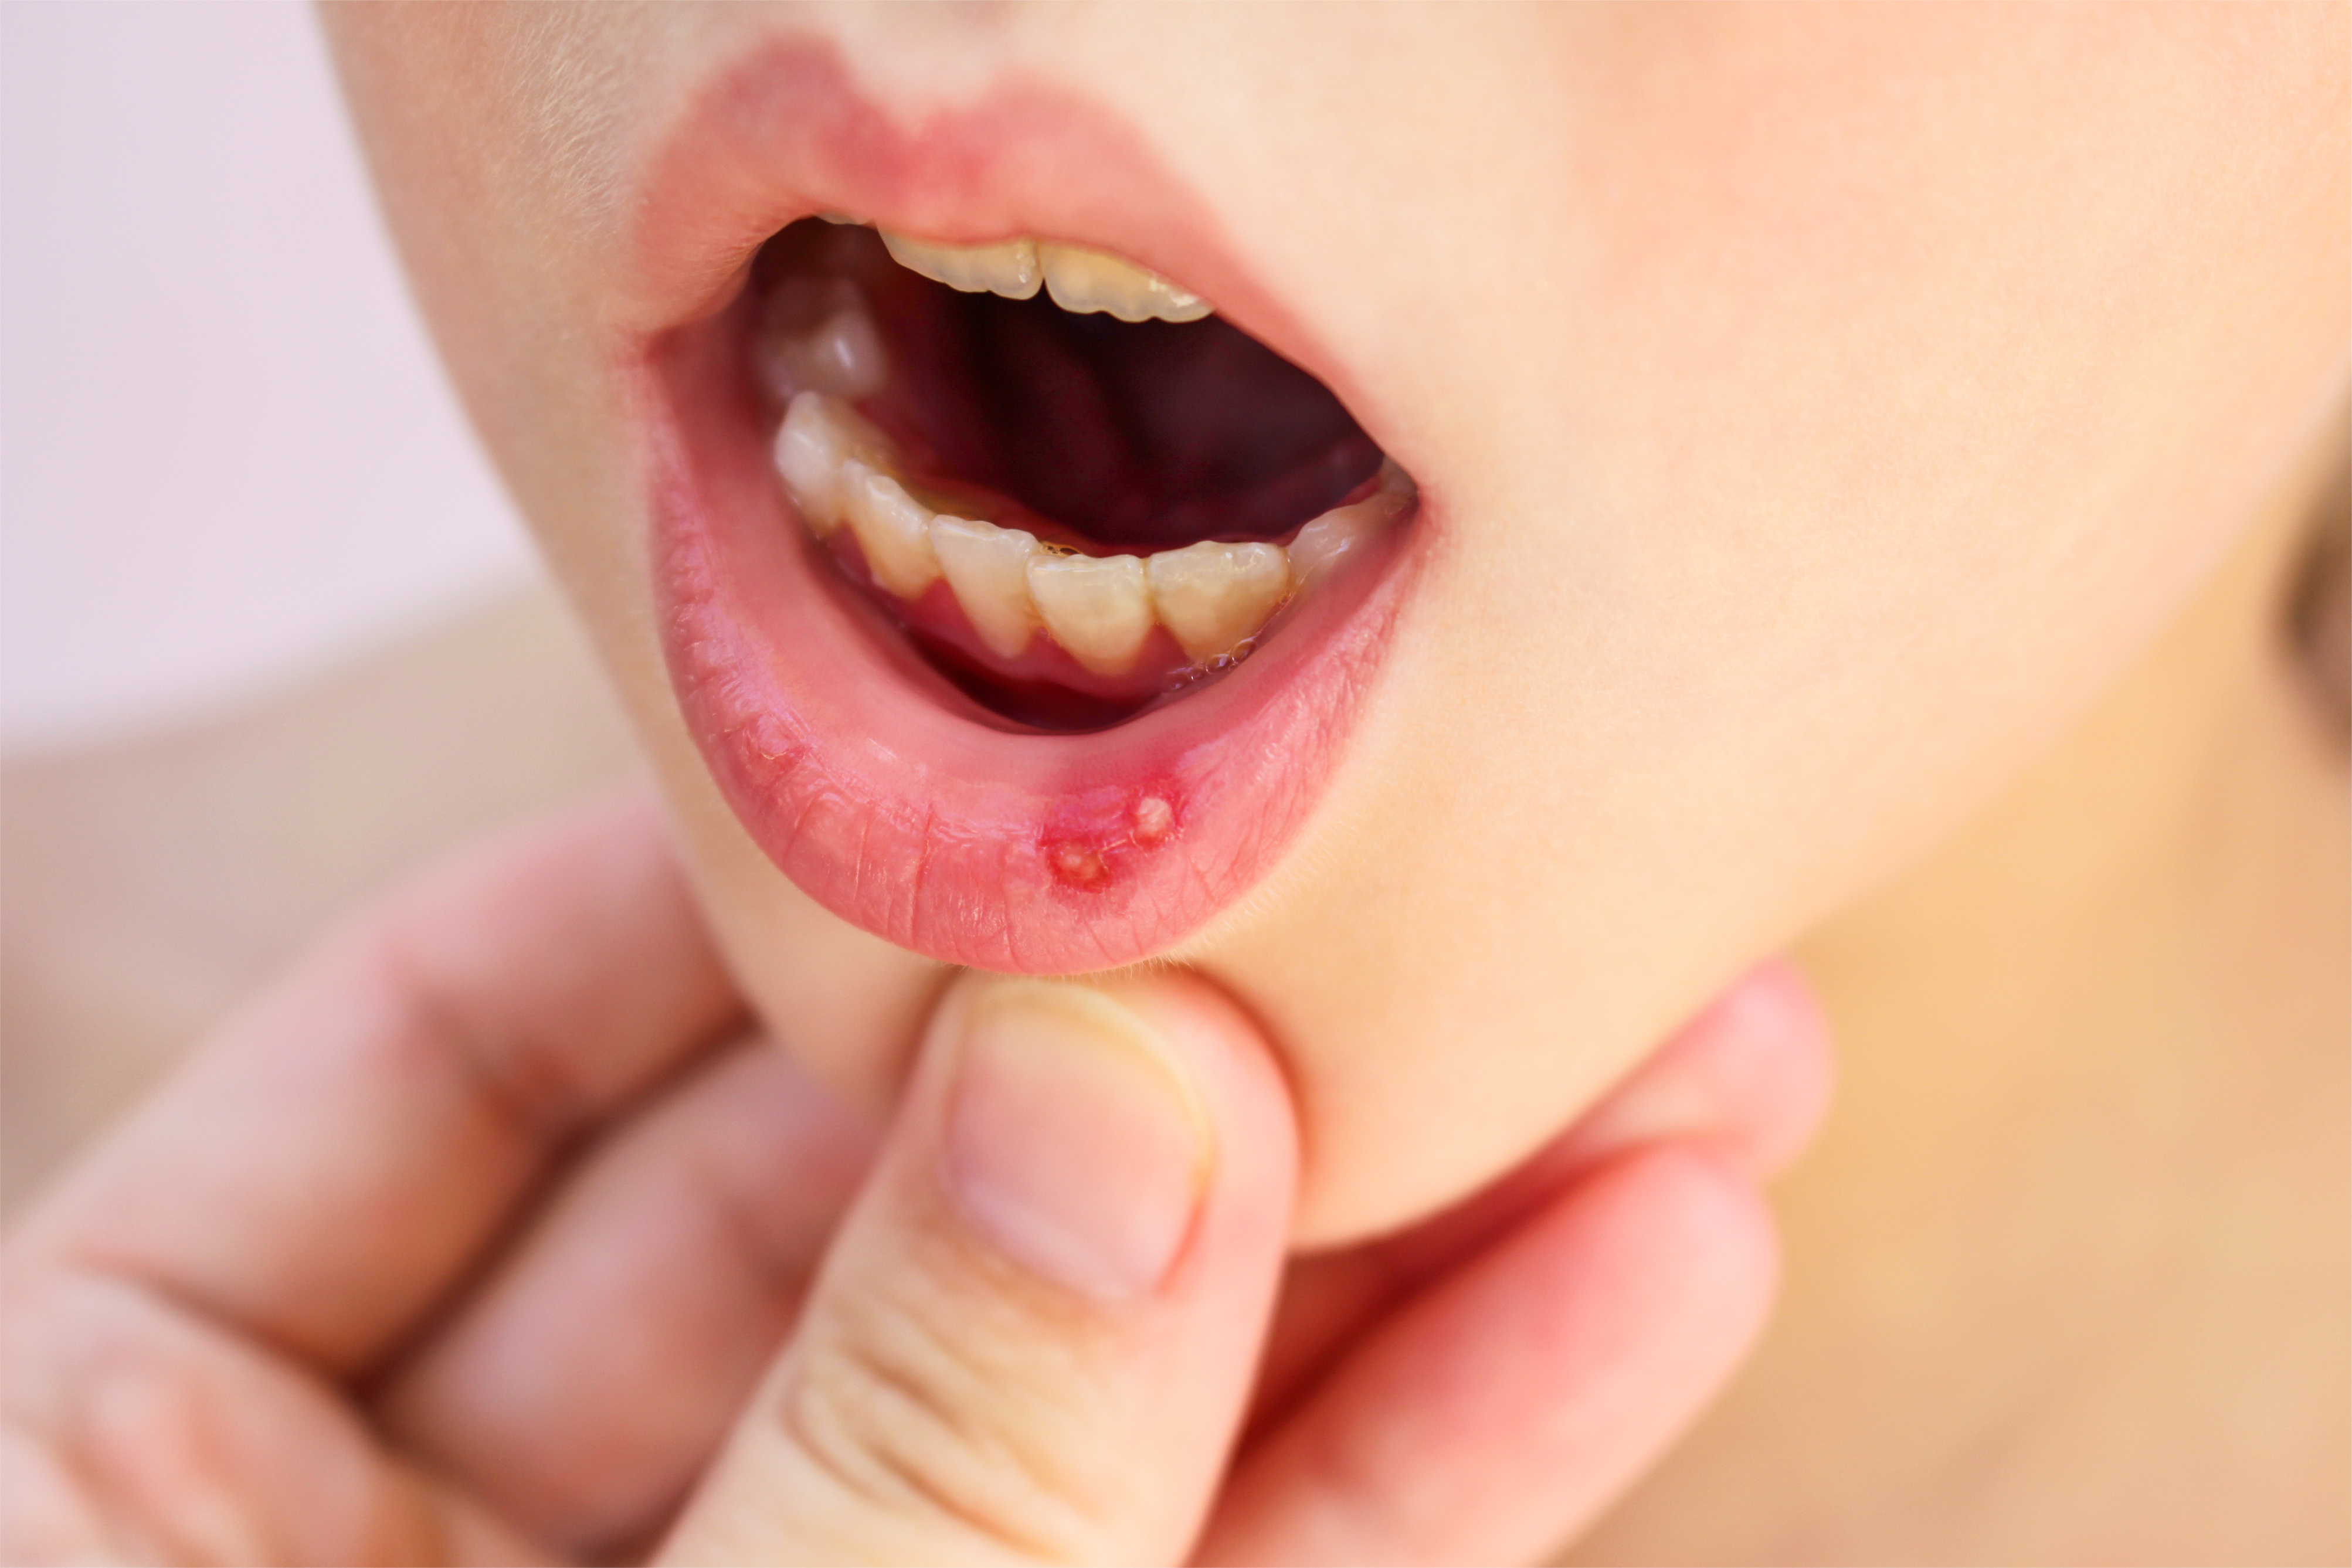 Canker Sore on Tongue